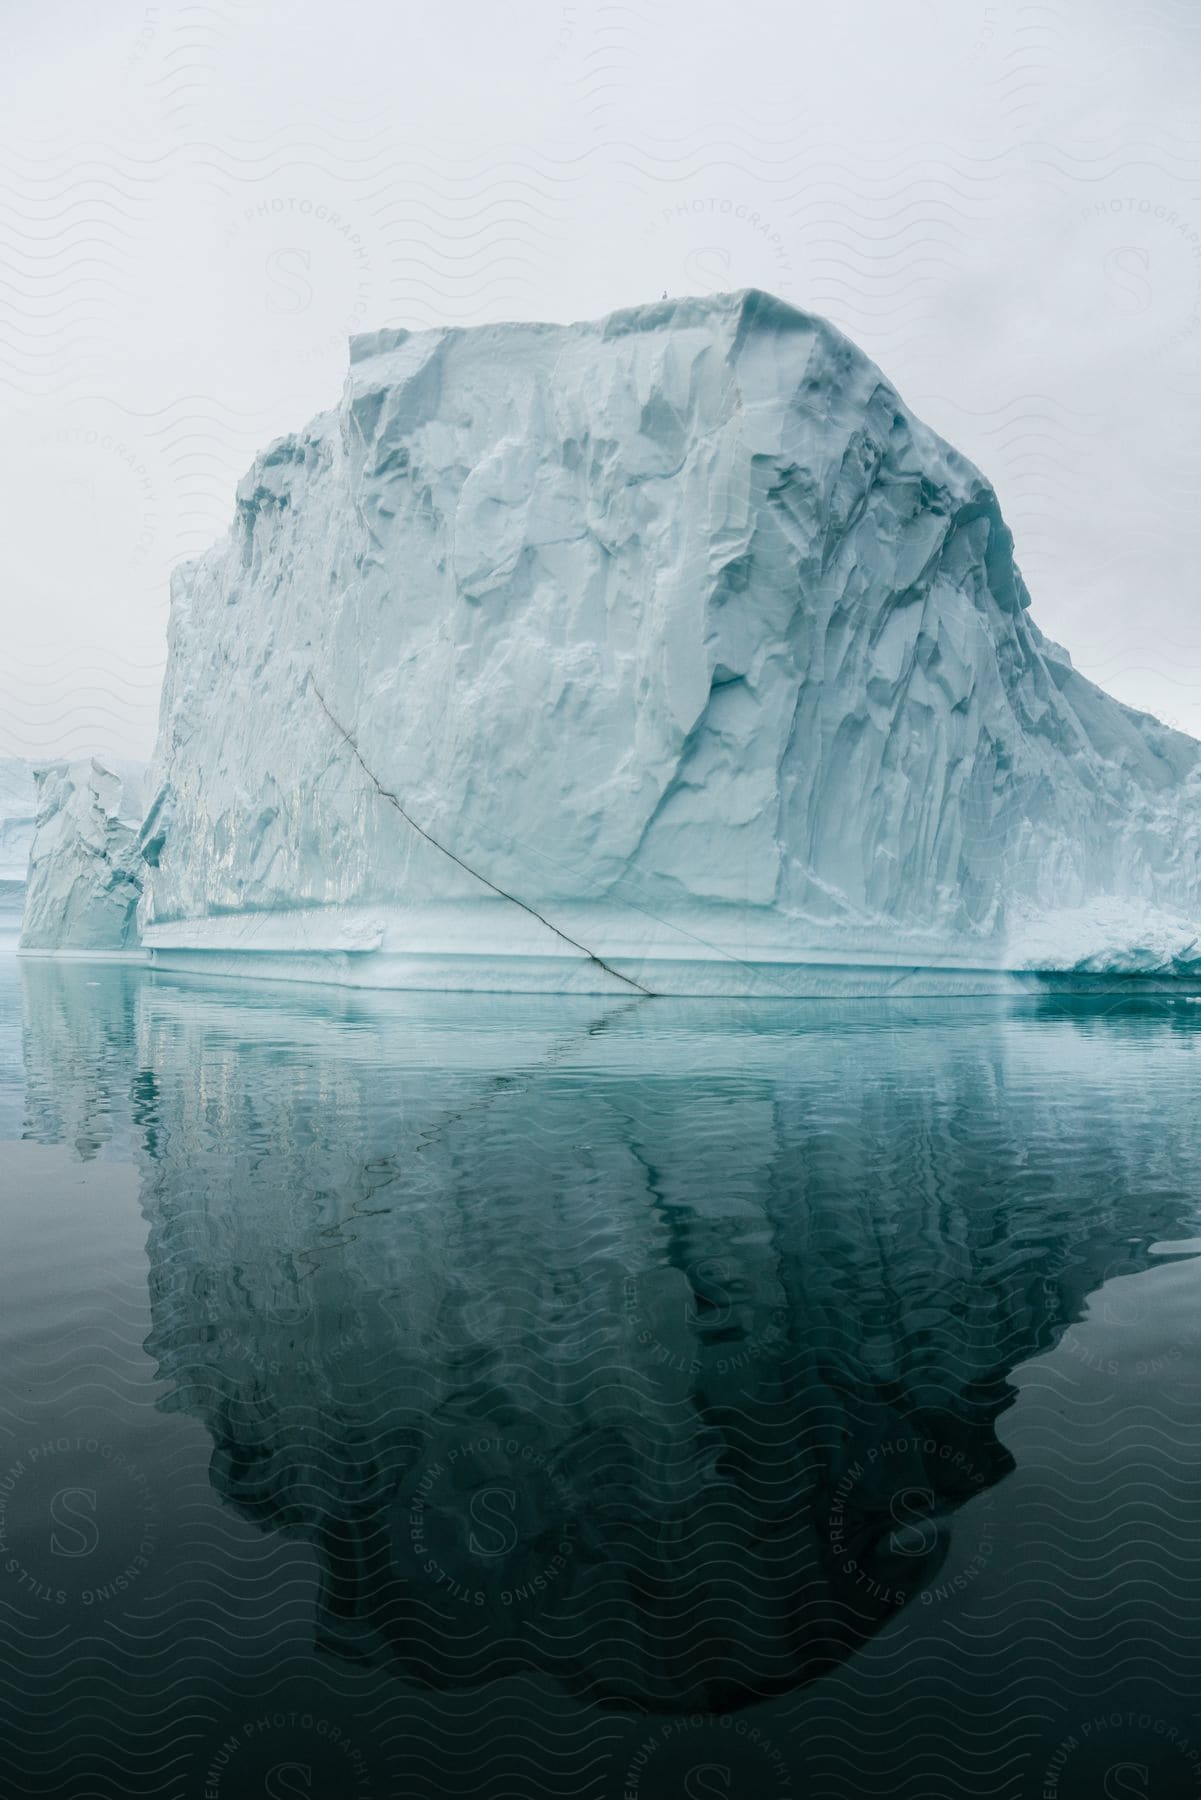 An iceberg of ice on top of the water that is reflecting your image.